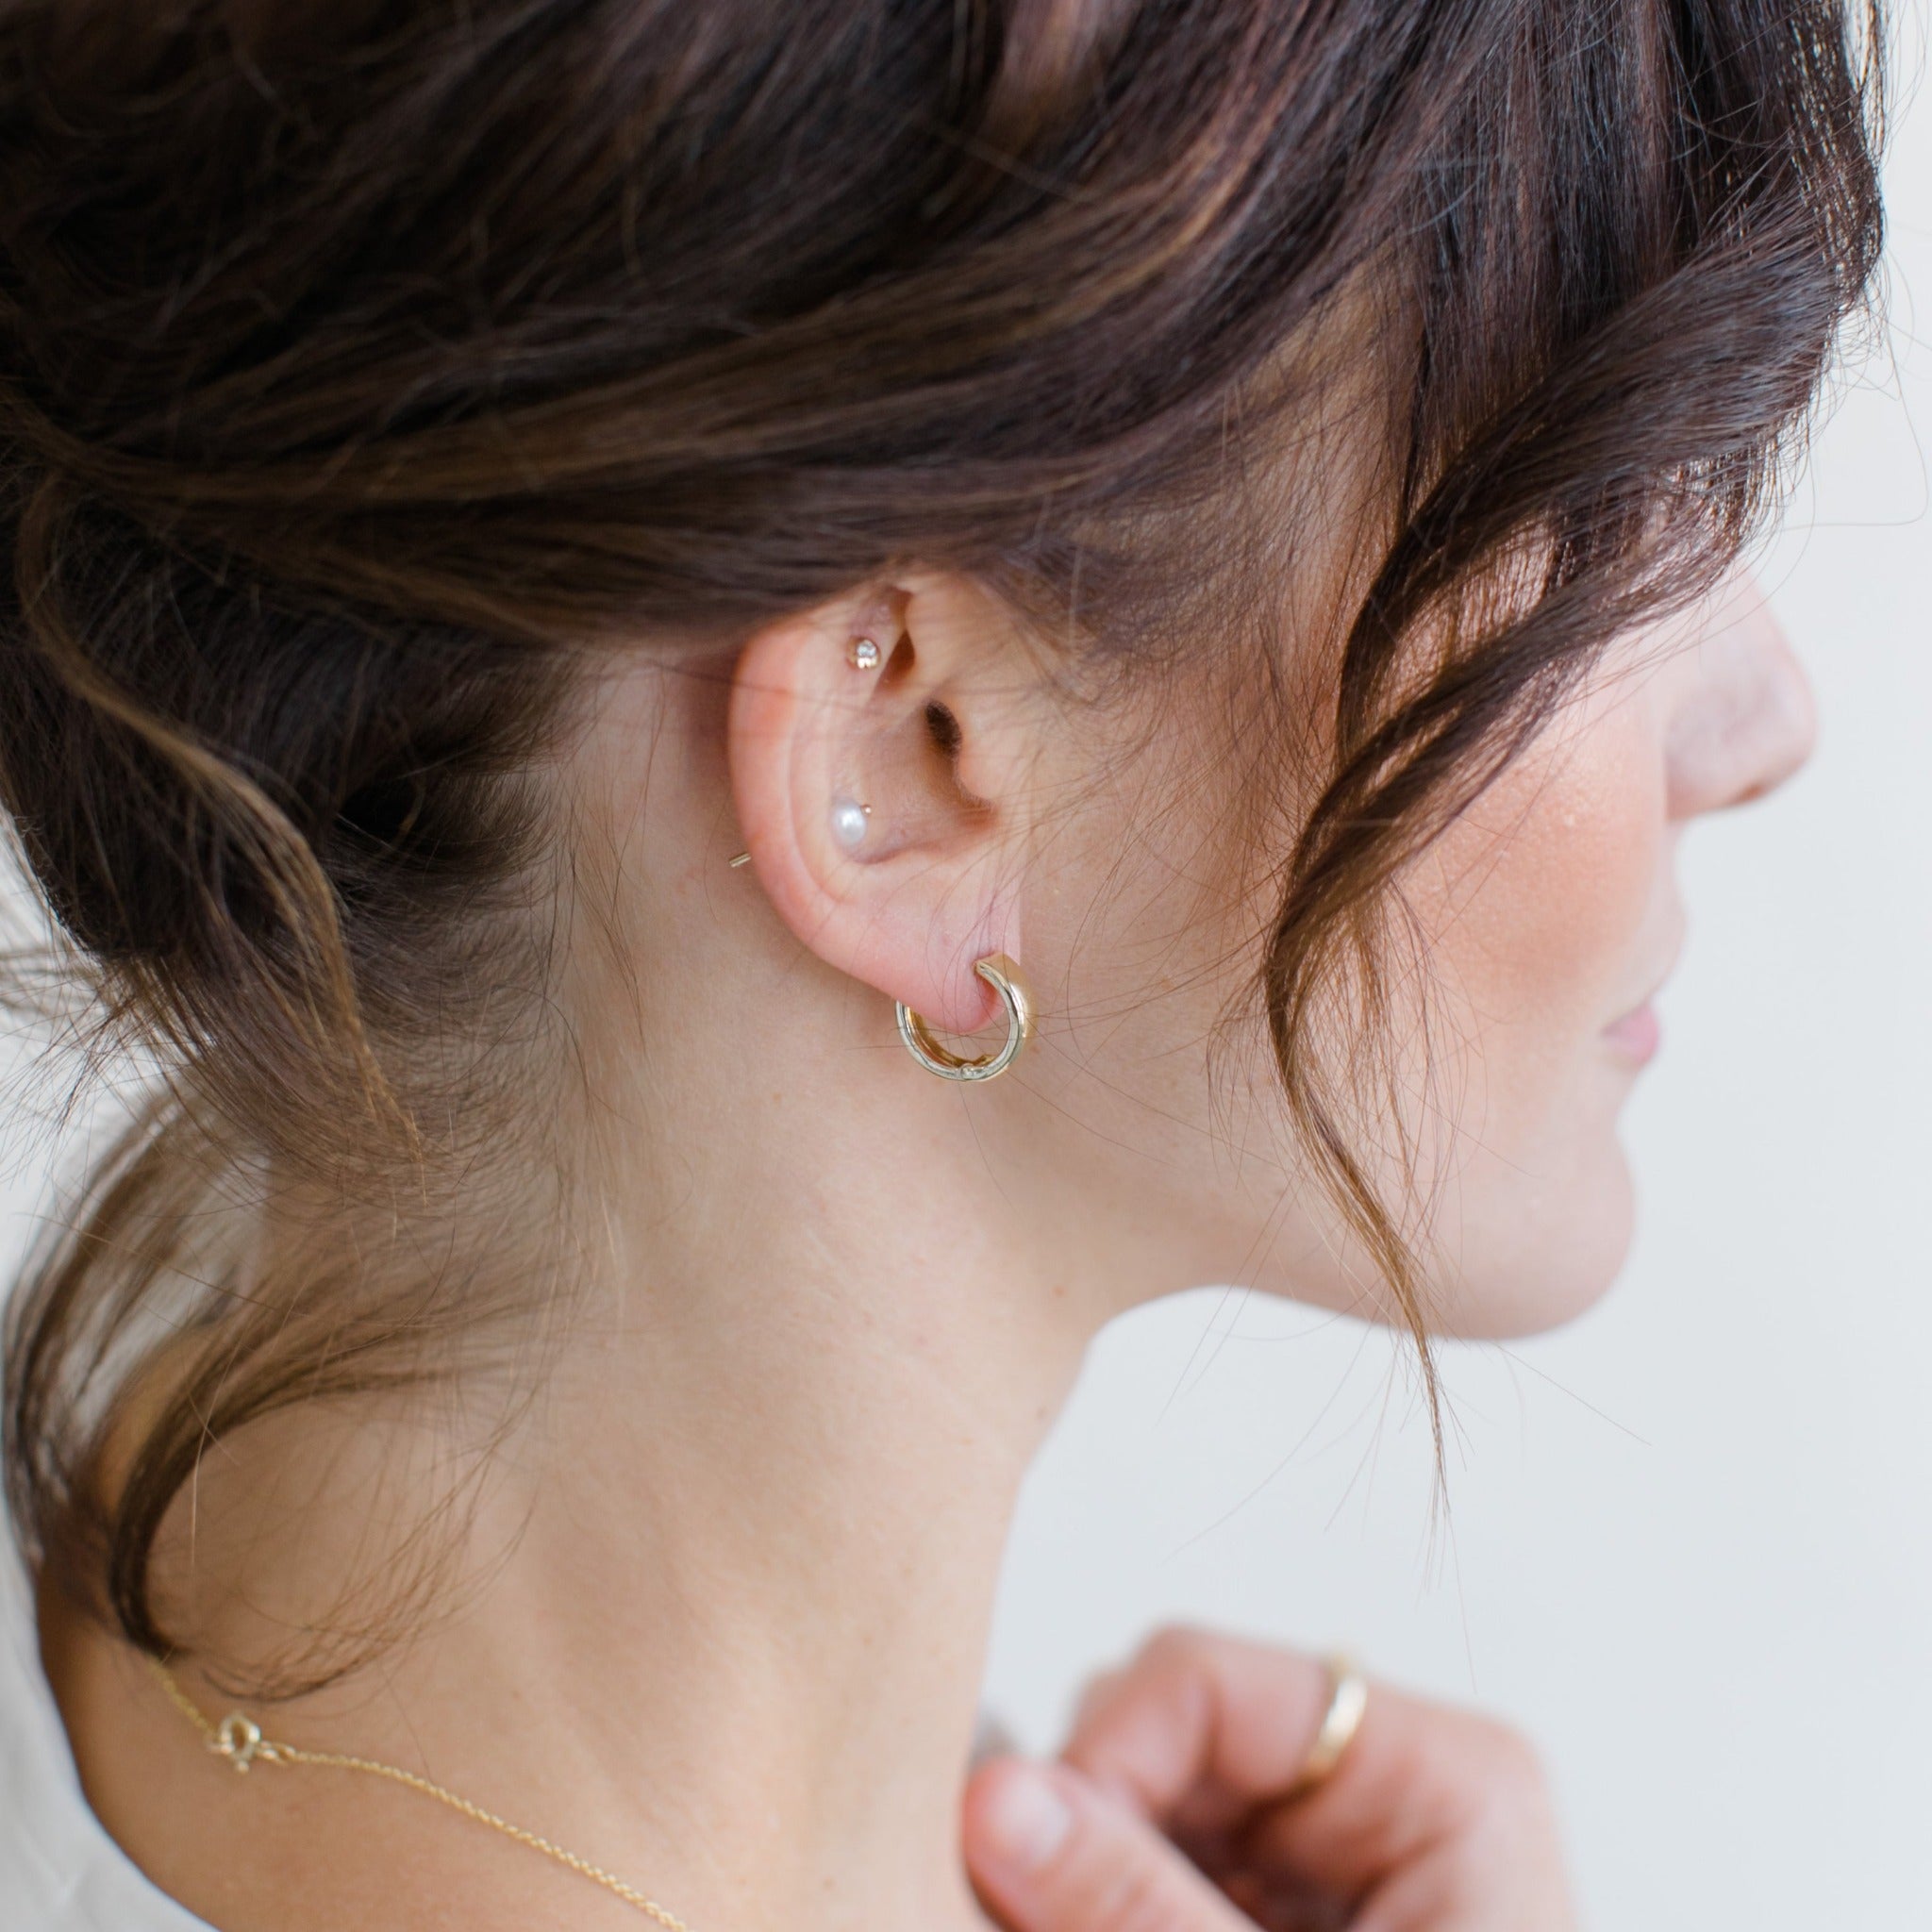 Modern minimal gold hoops look good at any angle. They are light and so great to wear all day.